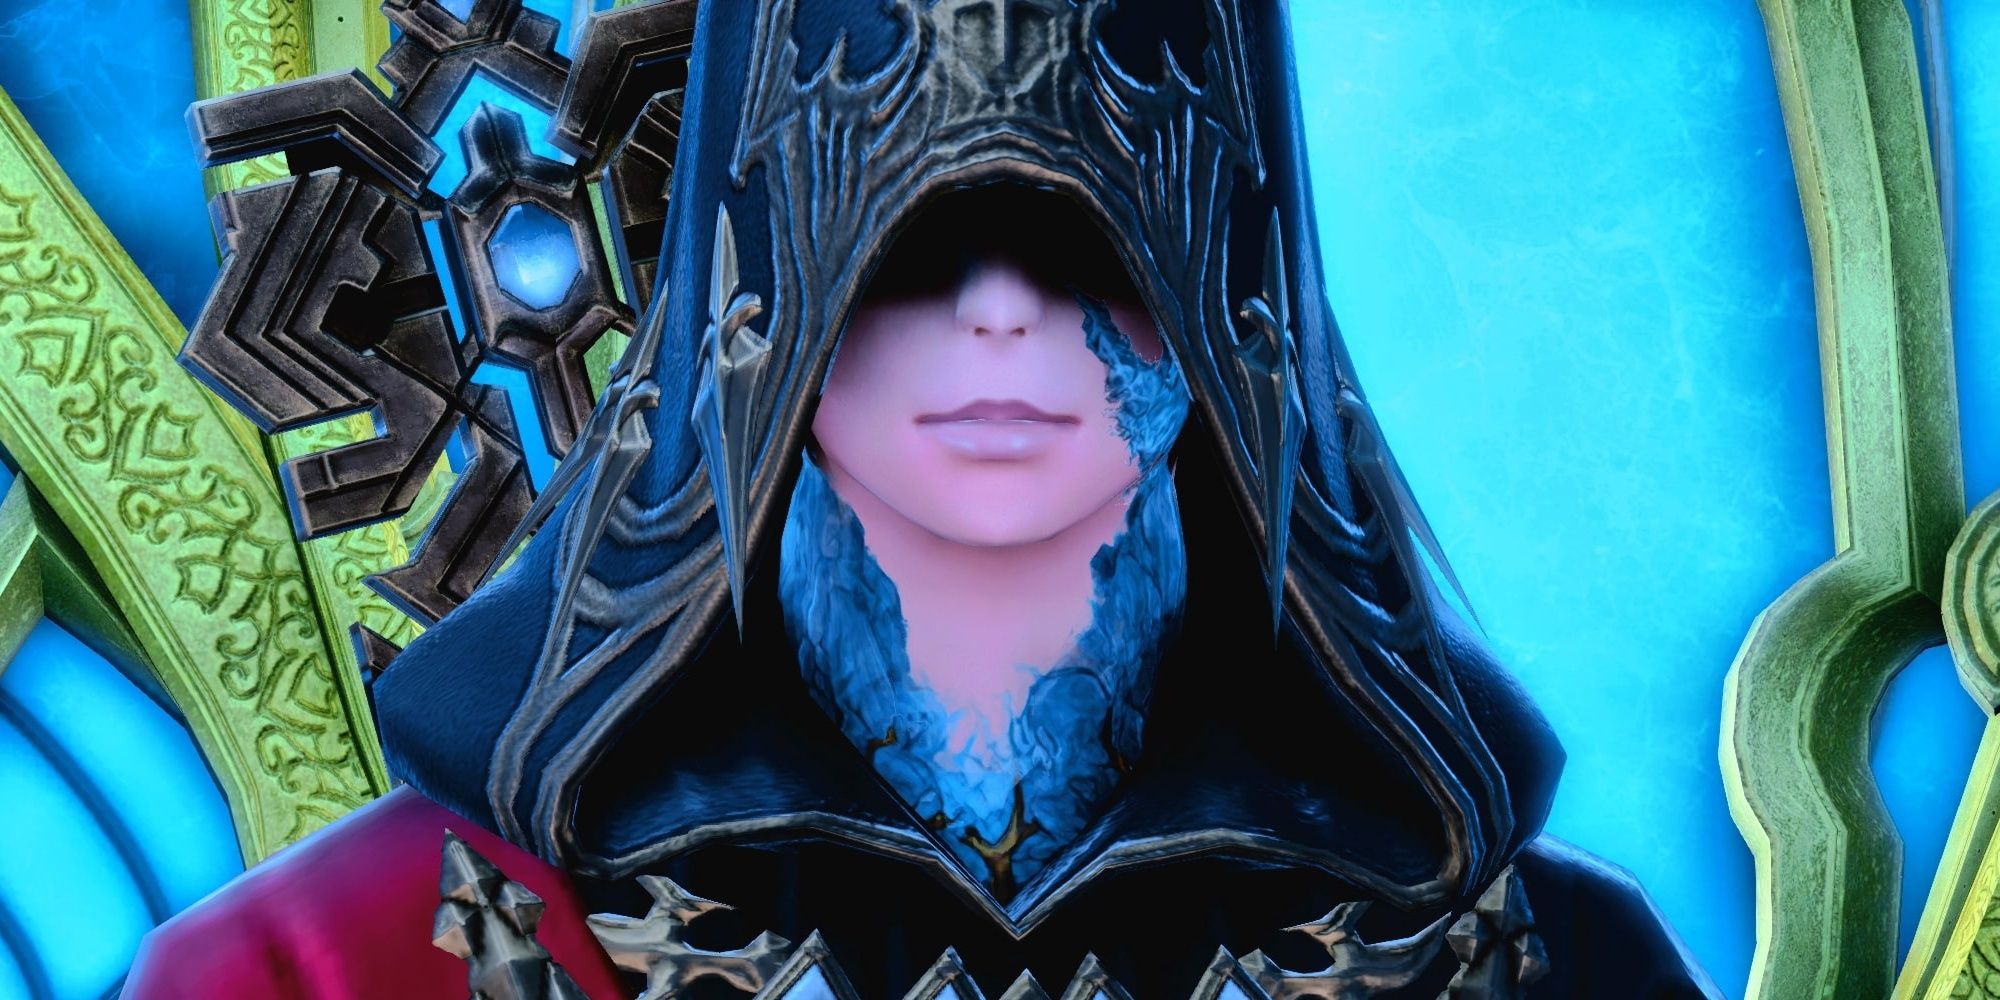 Final Fantasy 14 mod The Crystal Exarch with enhanced features courtesy of the mod, ponders in the Crystal Tower.